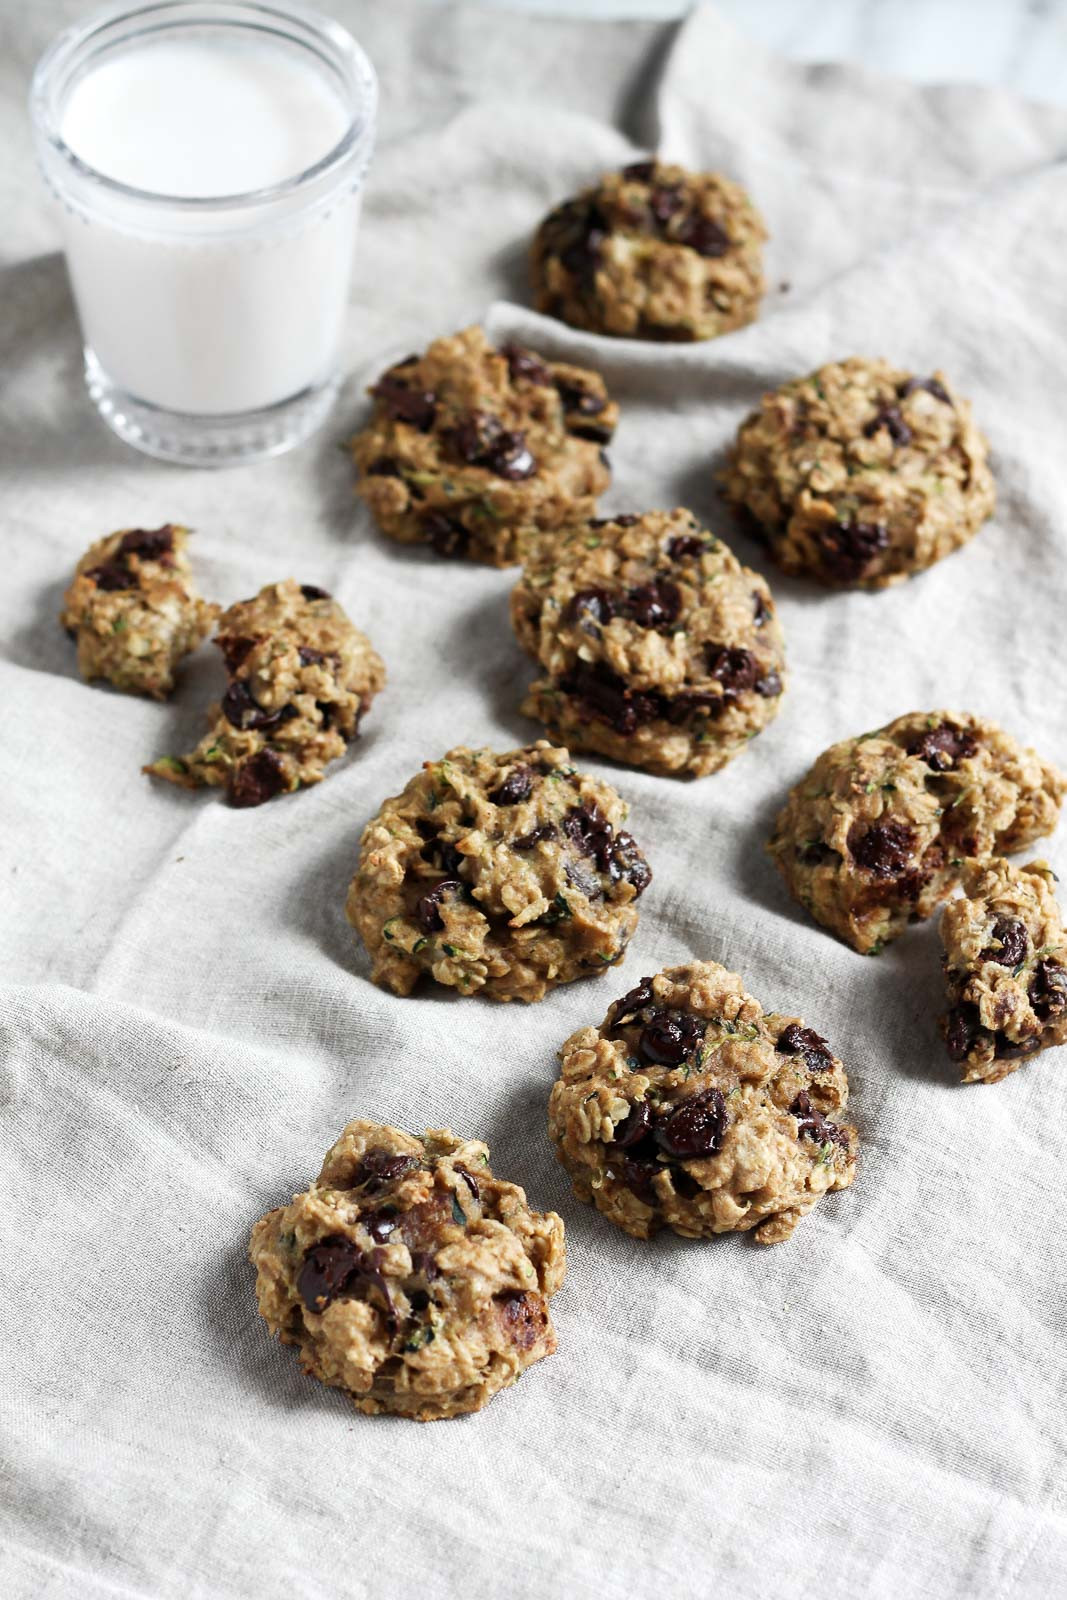 Healthy Chocolate Oatmeal Cookies the top 20 Ideas About Healthy Chocolate Chip Zucchini Oatmeal Cookies